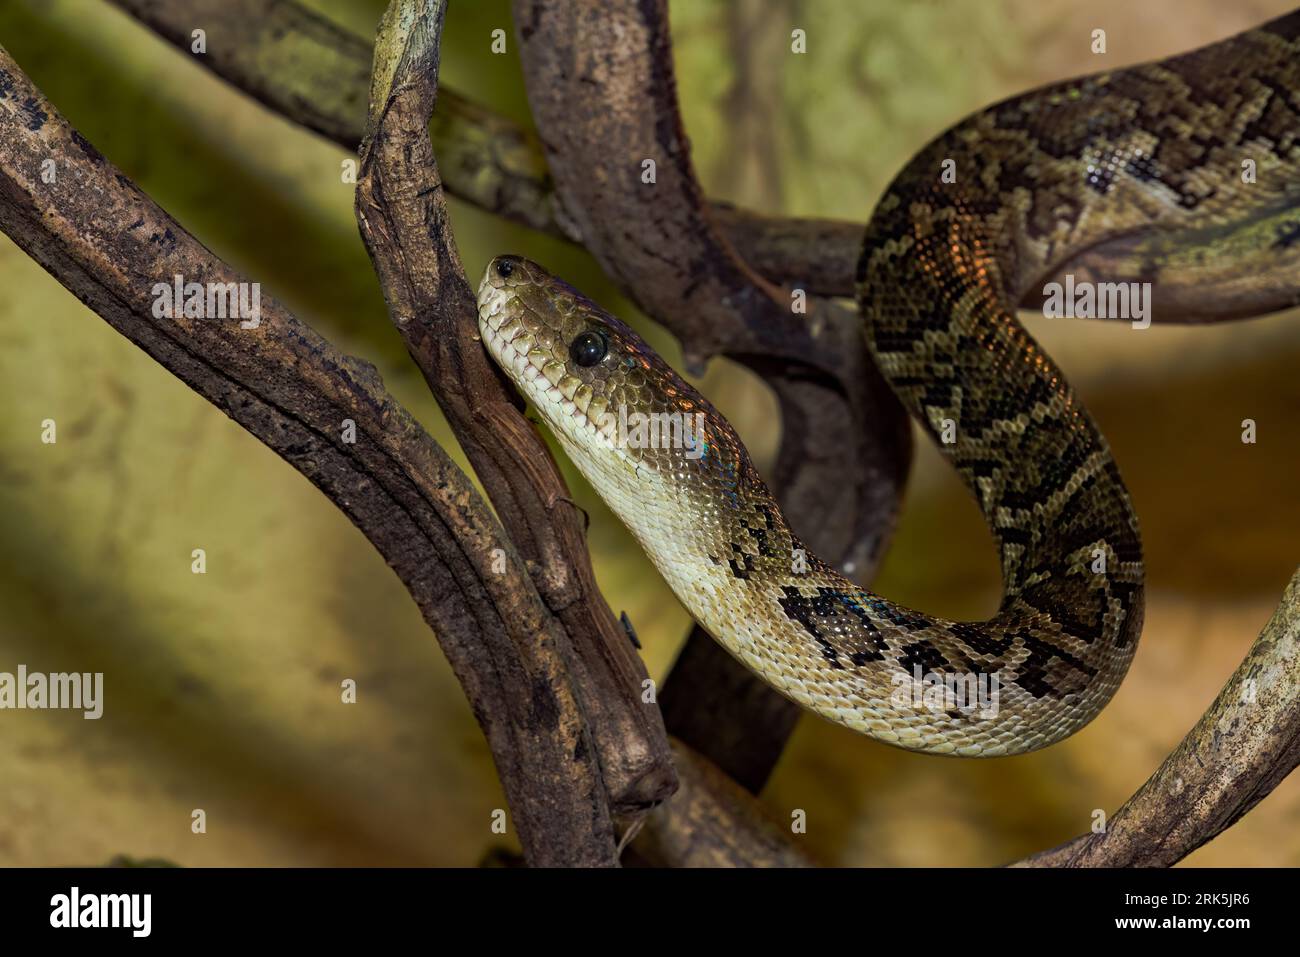 A closeup shot of a snake coiled around a branch of a tree. Stock Photo